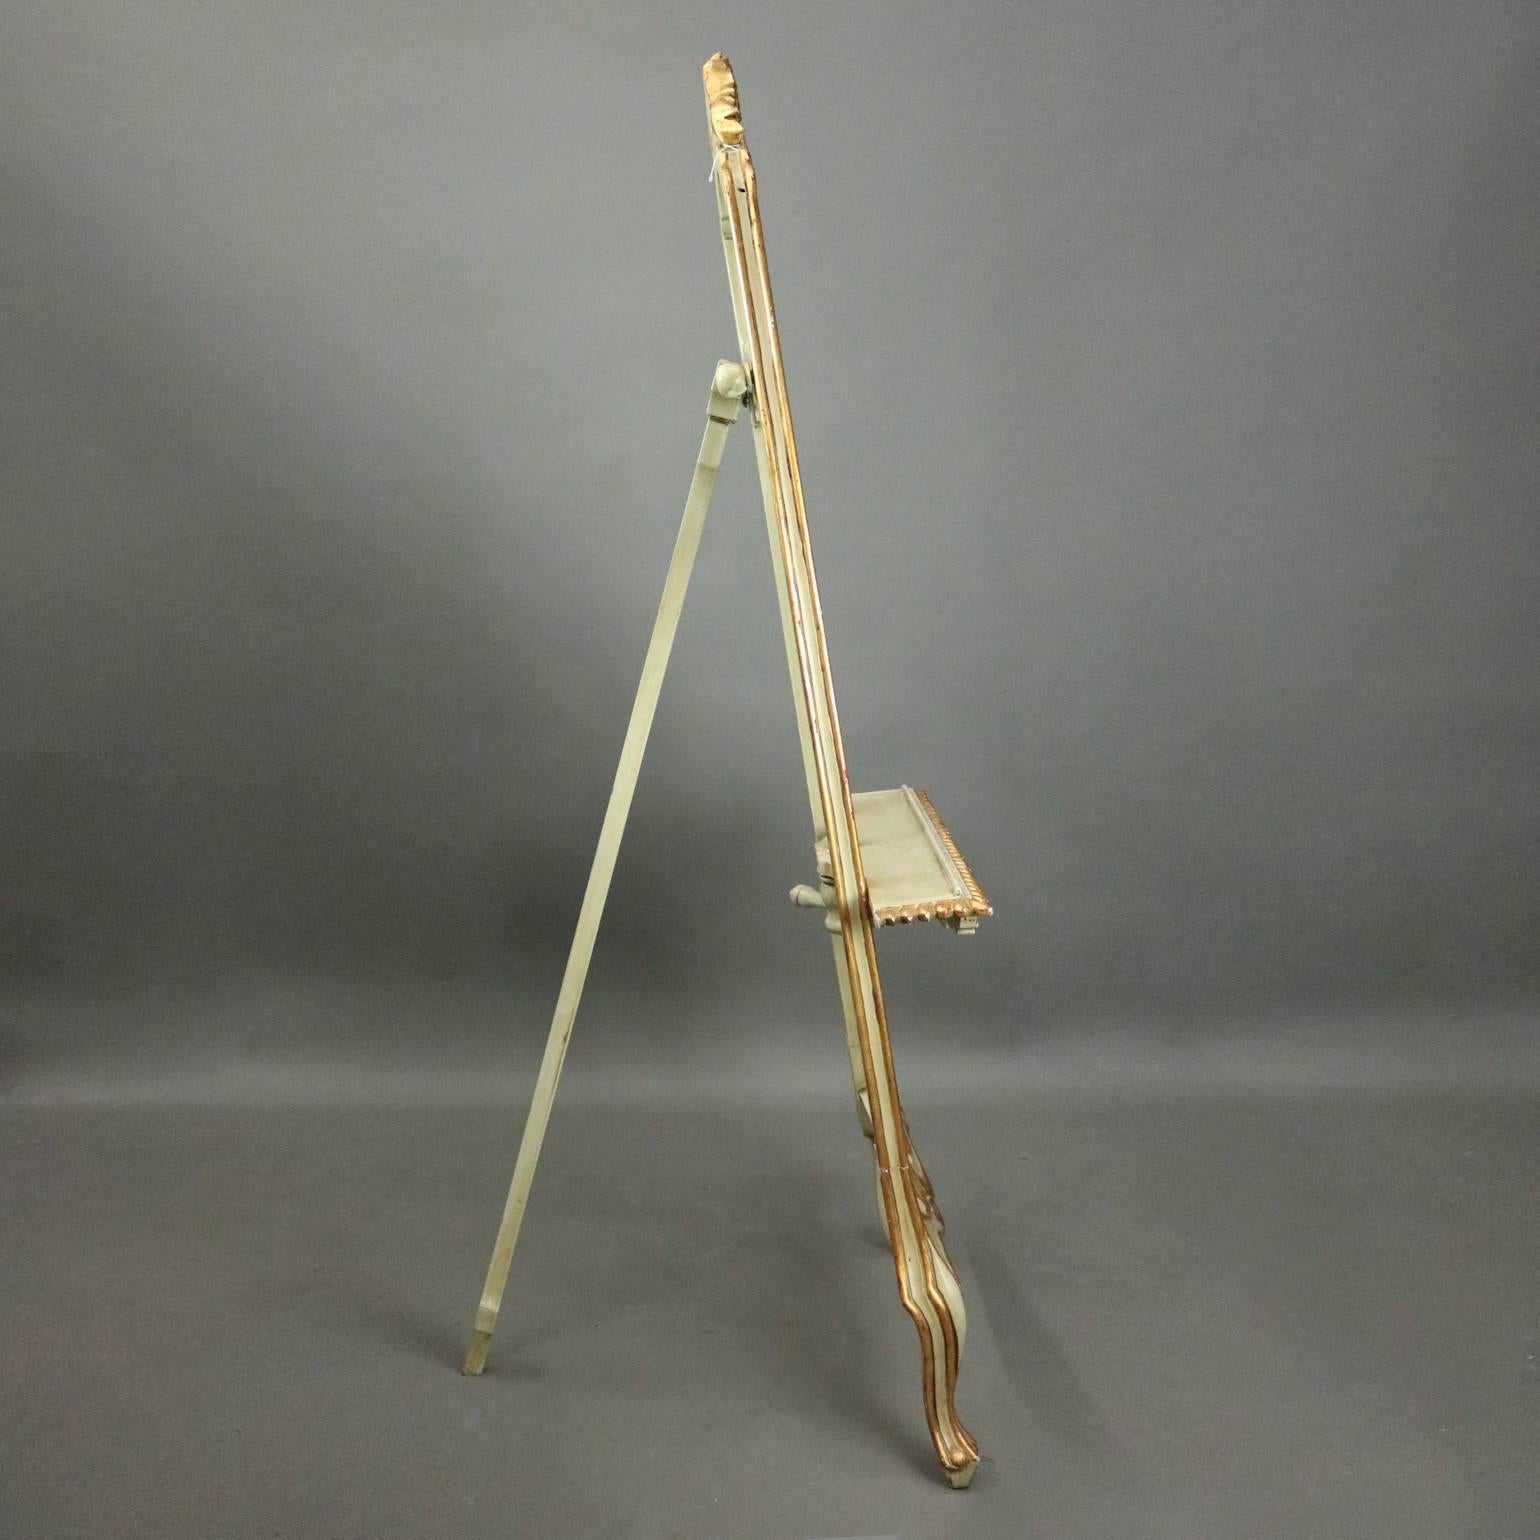 Carved Vintage French, Louis XIV Style Painted and Gilt Adjustable Art Easel